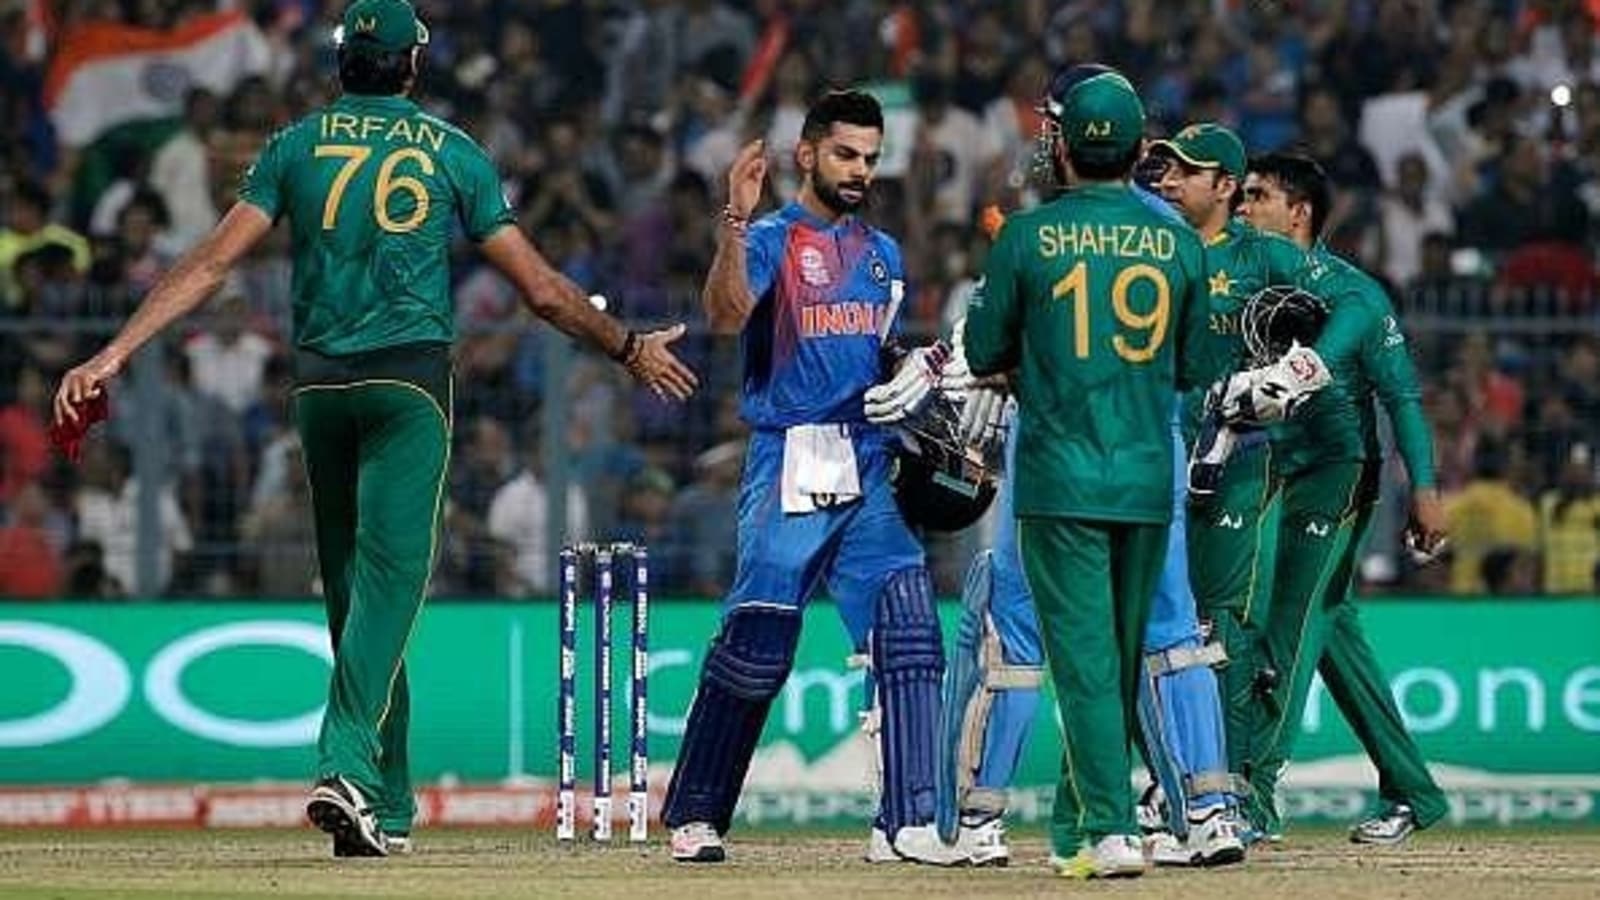 India vs Pakistan, 50 The long and short story of India's dominance over Pakistan in T20 World